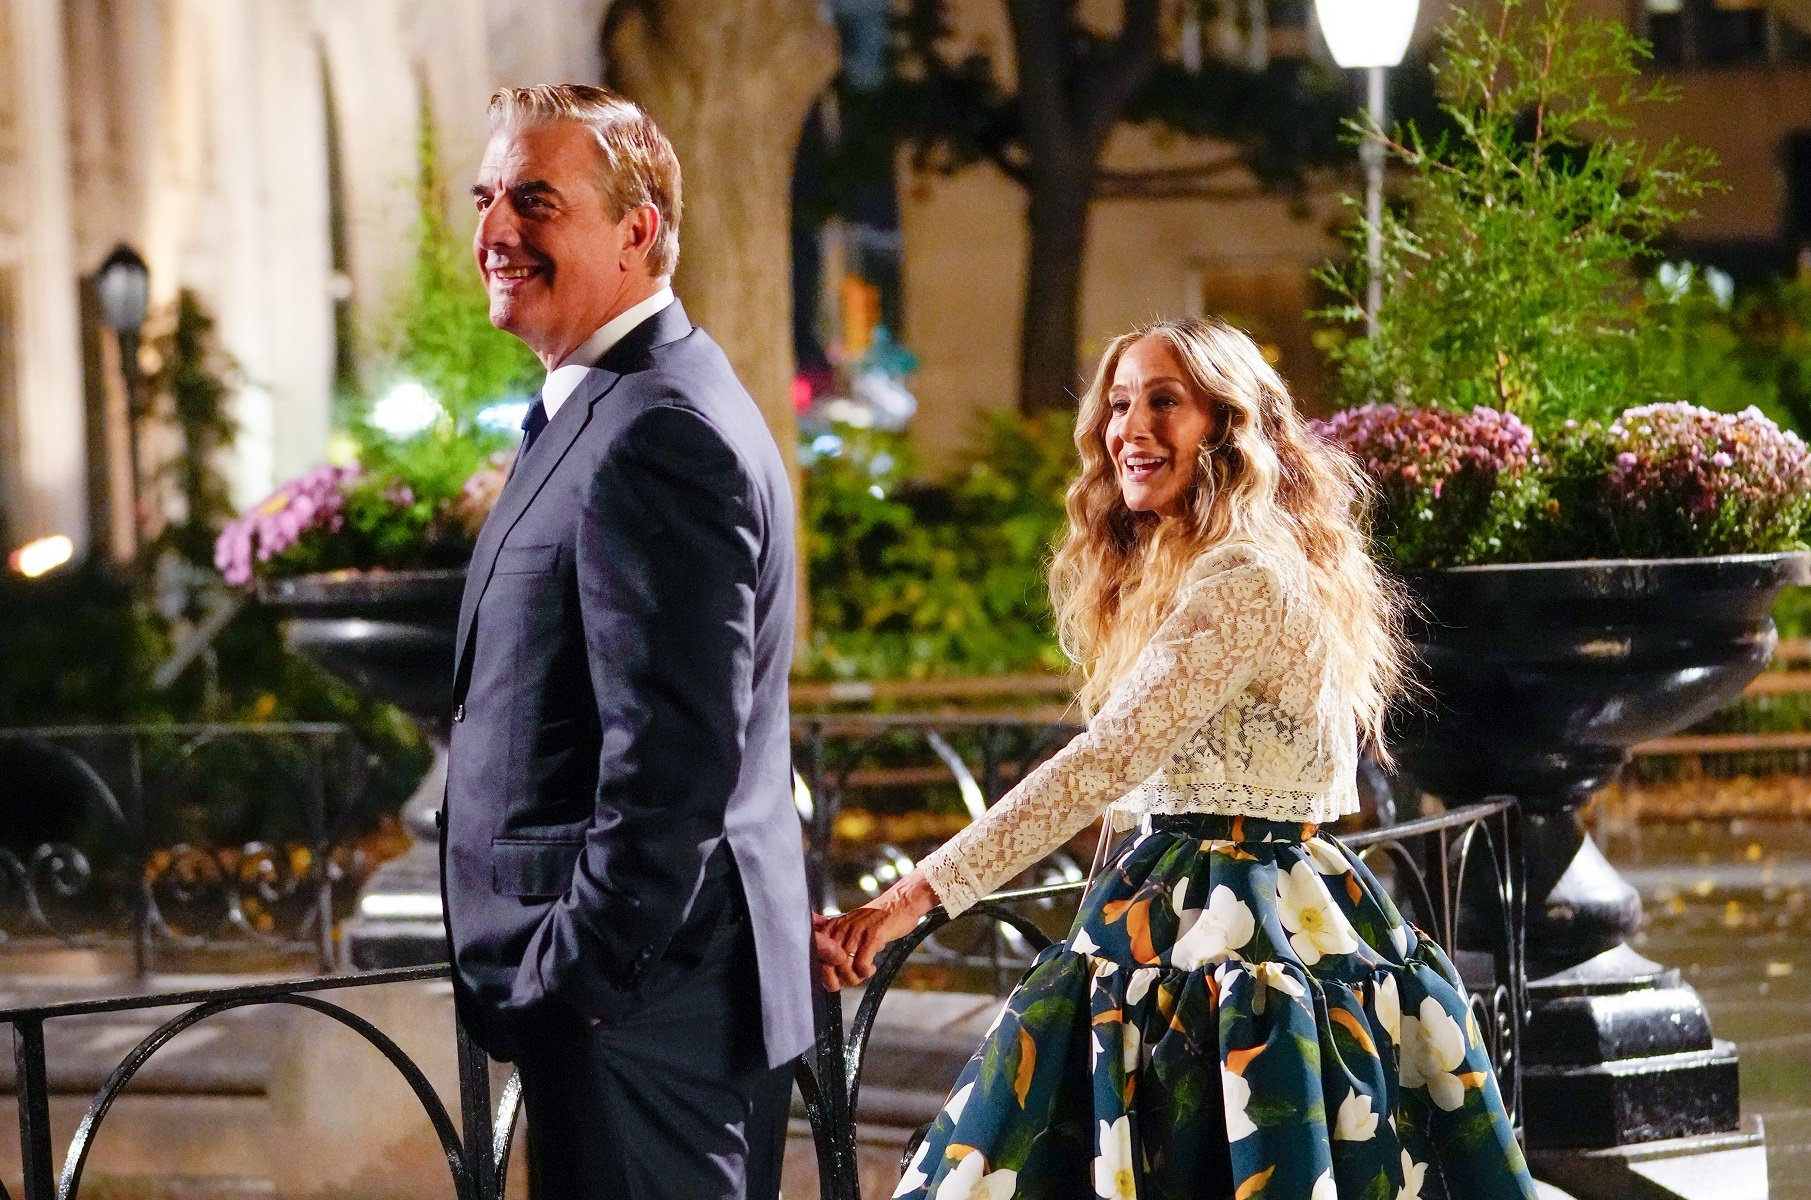 Chris Noth and Sarah Jessica Parker are seen filming scenes for 'And Just Like That...' in Madison Square Park